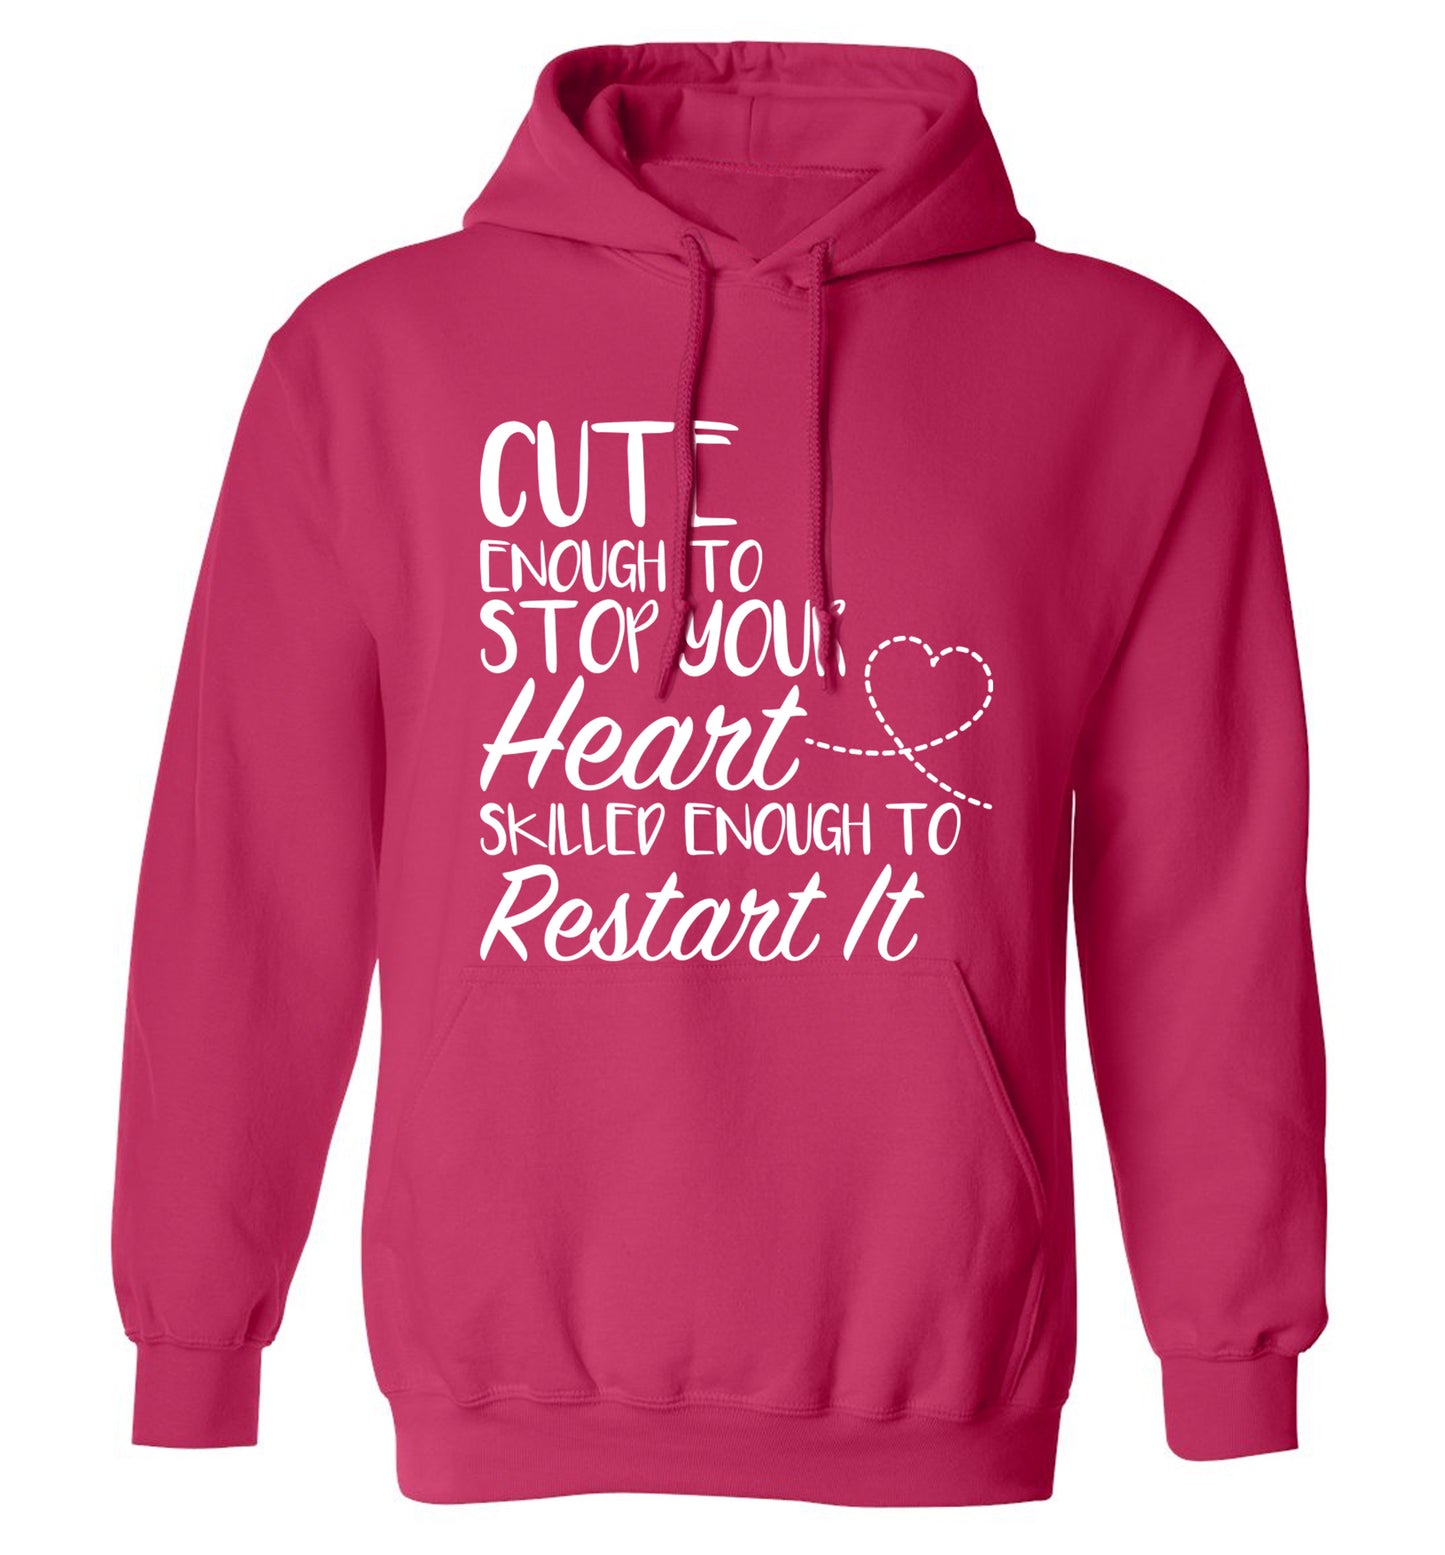 Cute enough to stop your heart skilled enough to restart it adults unisex pink hoodie 2XL